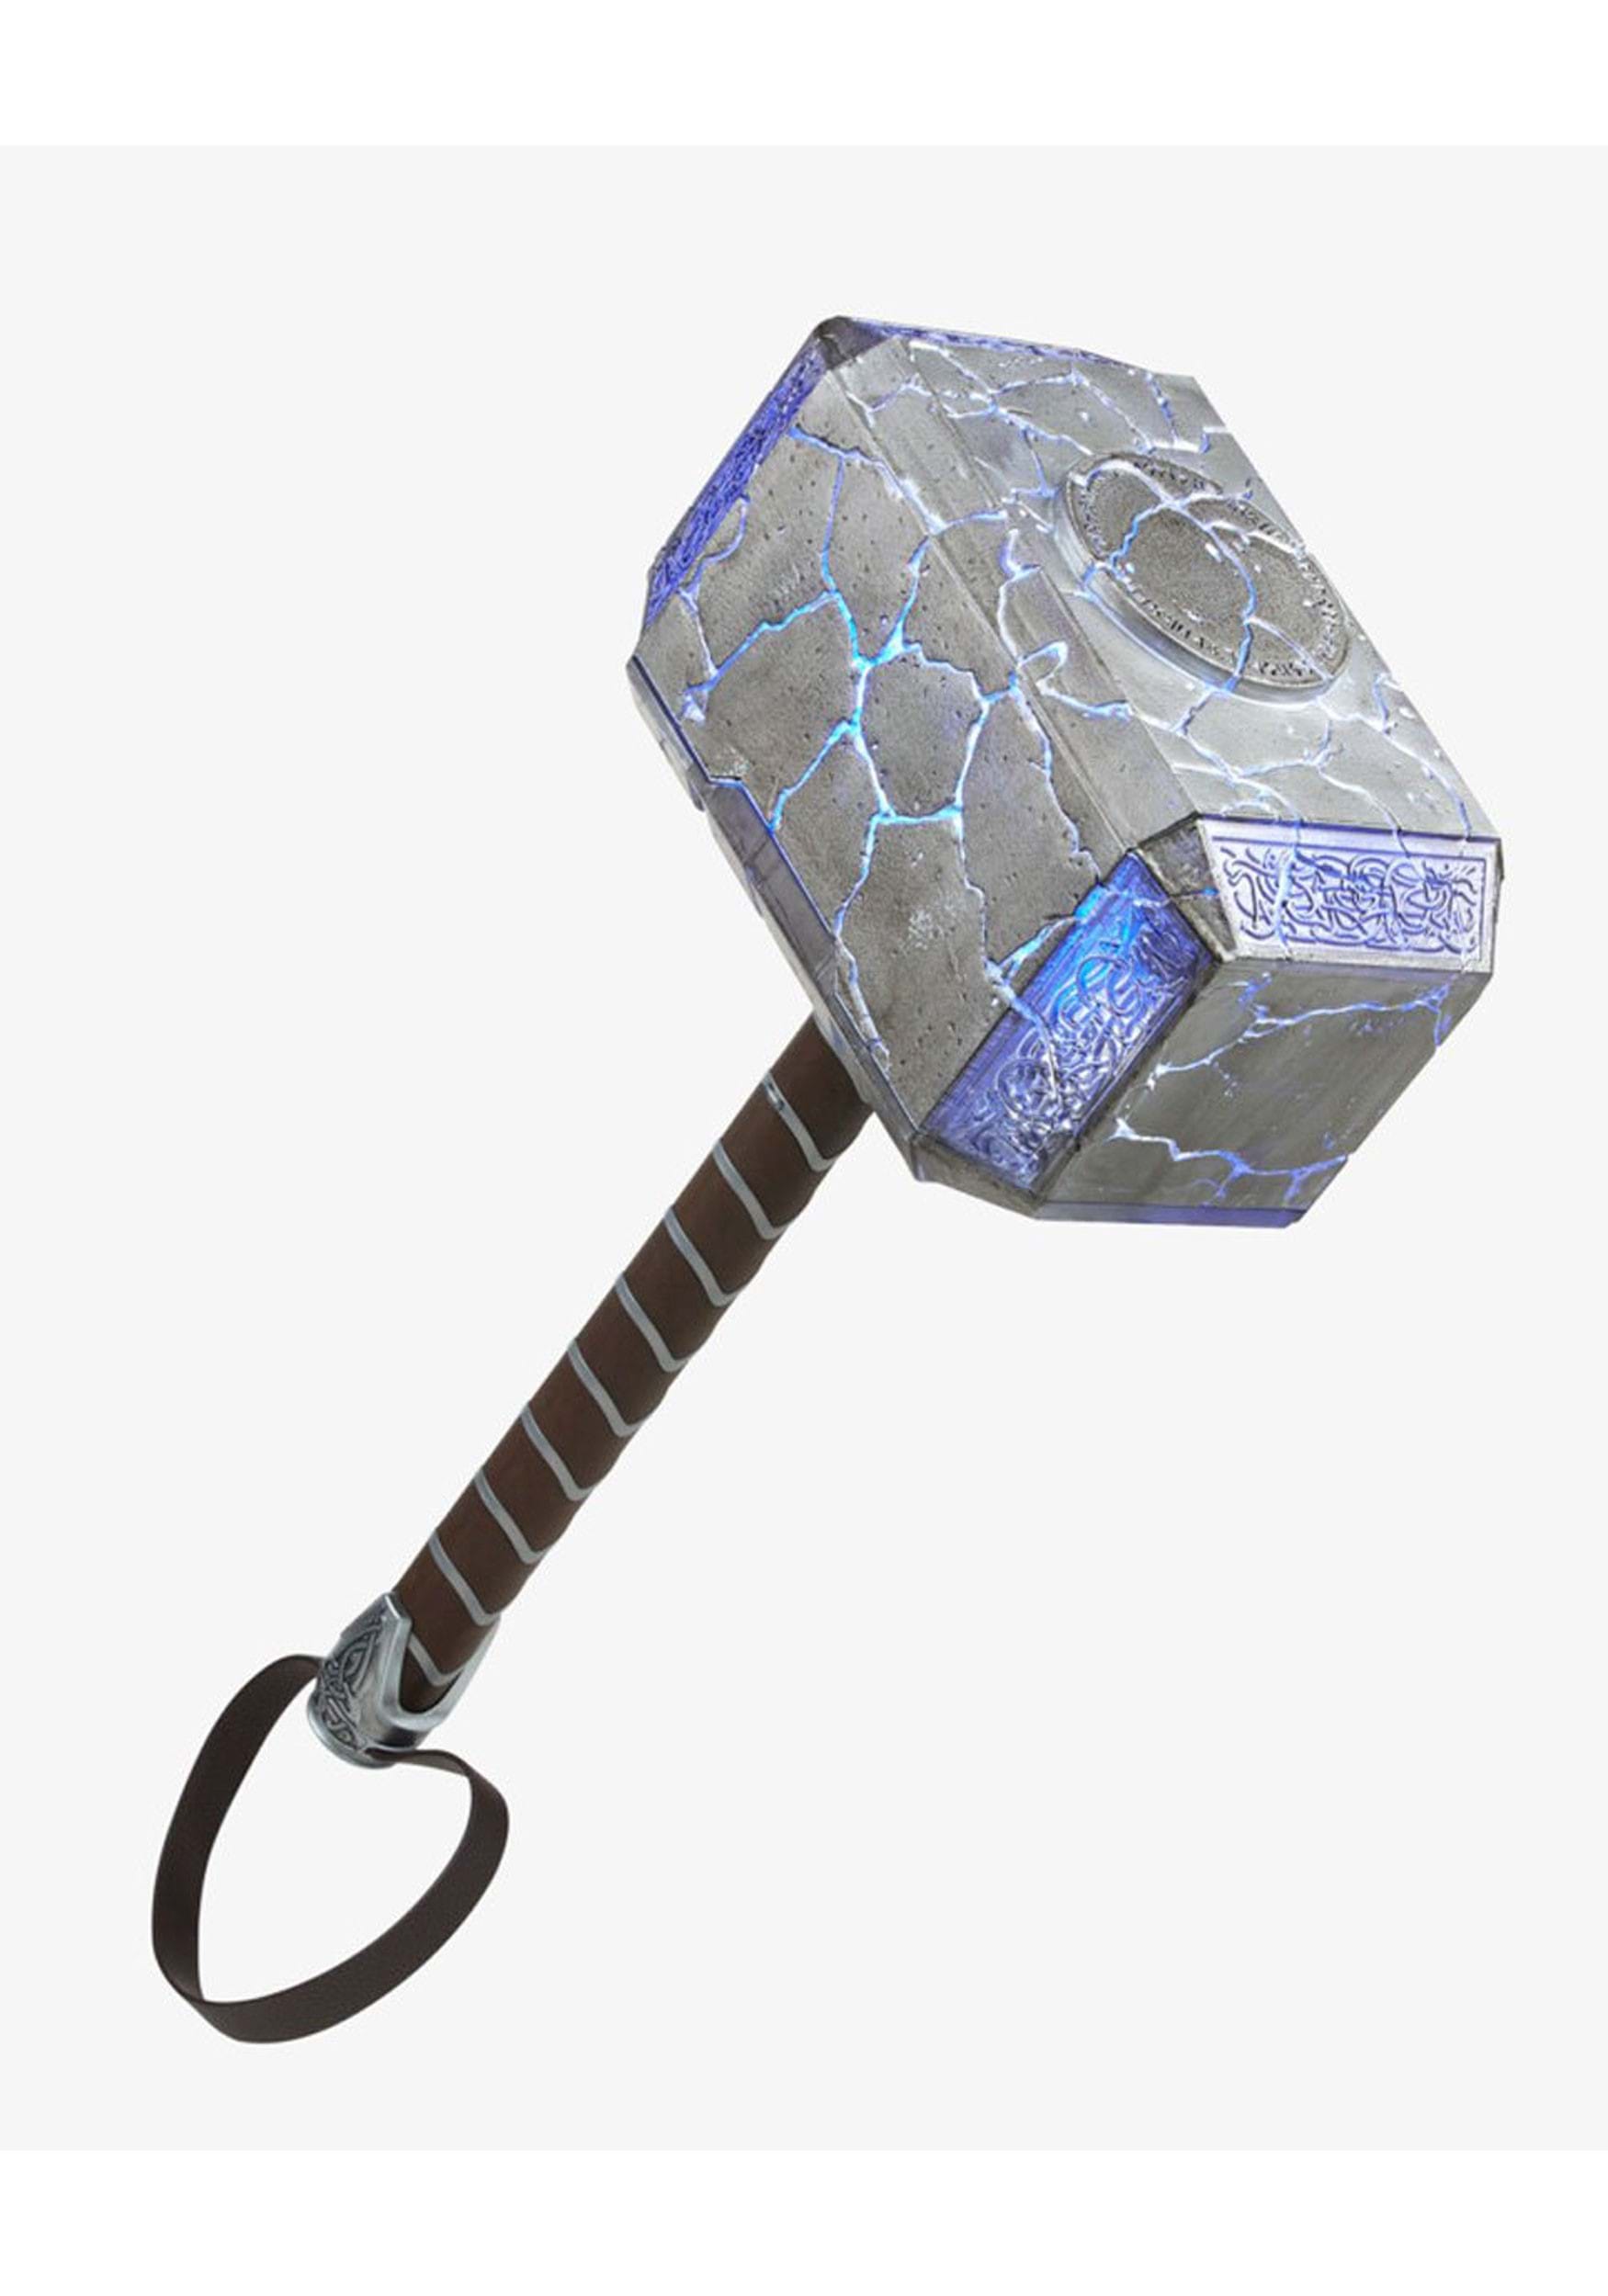 Thor: Love and Thunder Electronic Mjolnir Hammer Prop